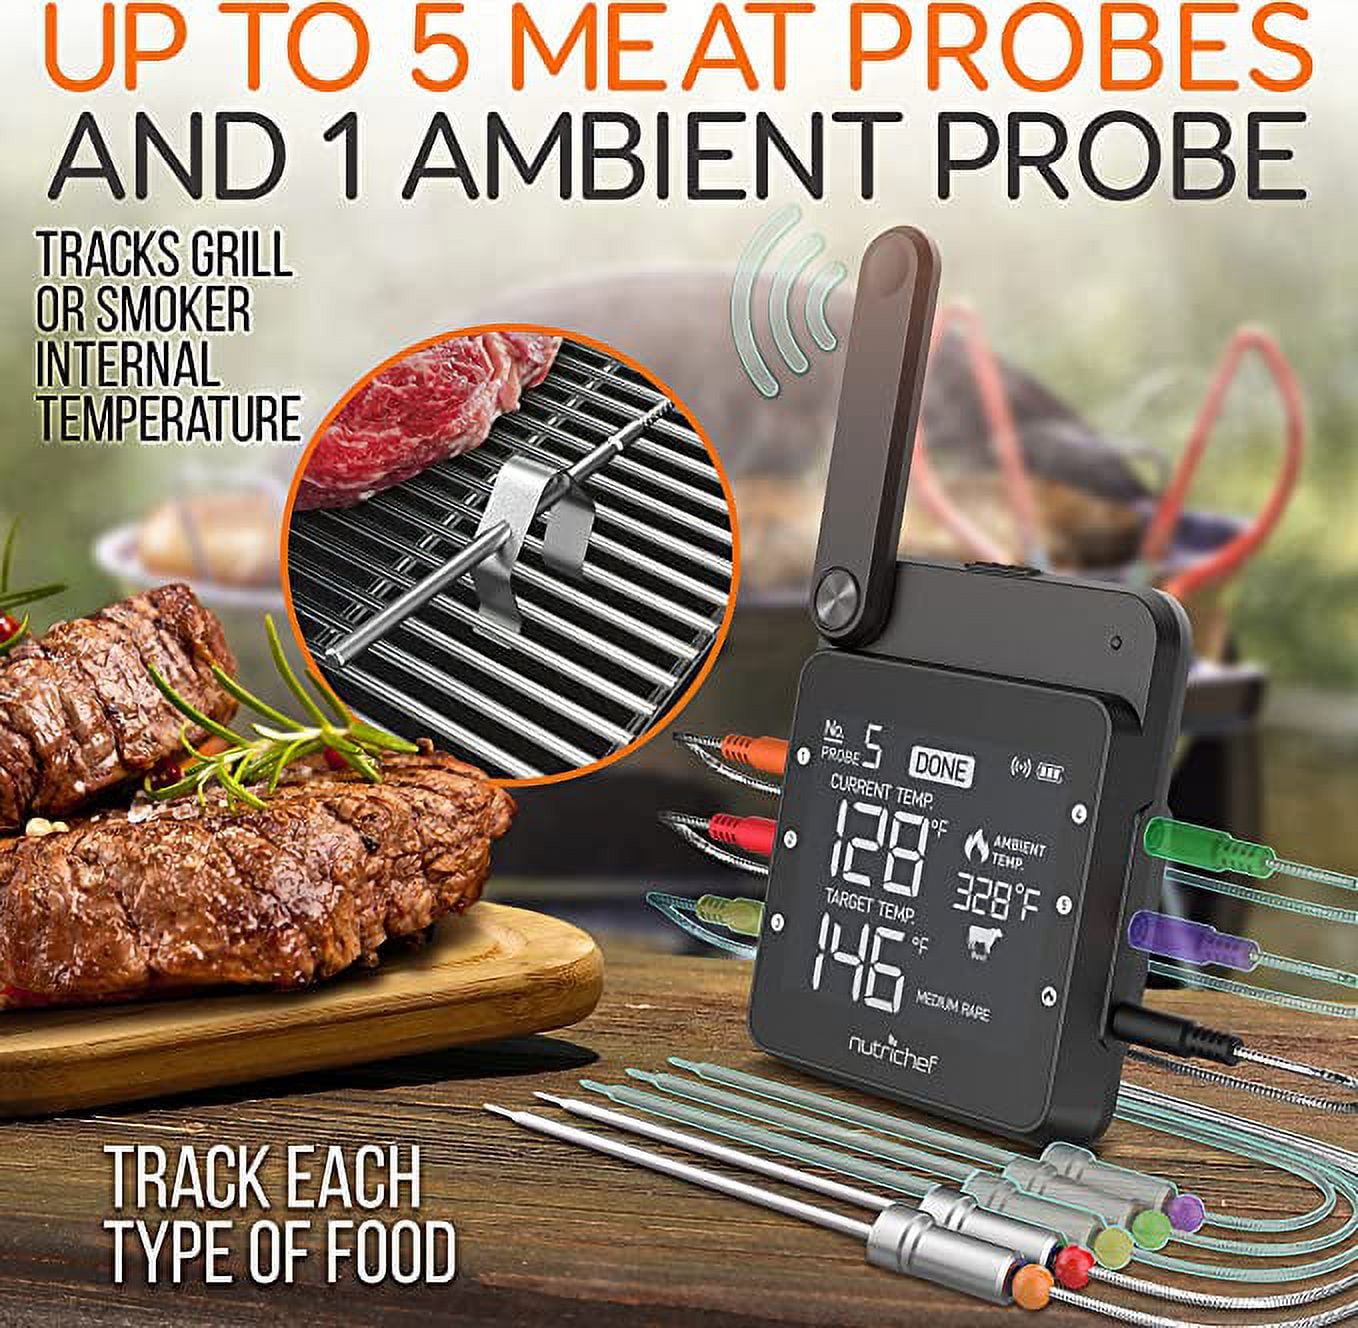 NutriChef PWIRBBQ90 - BBQ Thermometer - Kitchen & Outdoor Wireless Grill  Thermometer with Smartphone App Monitoring 